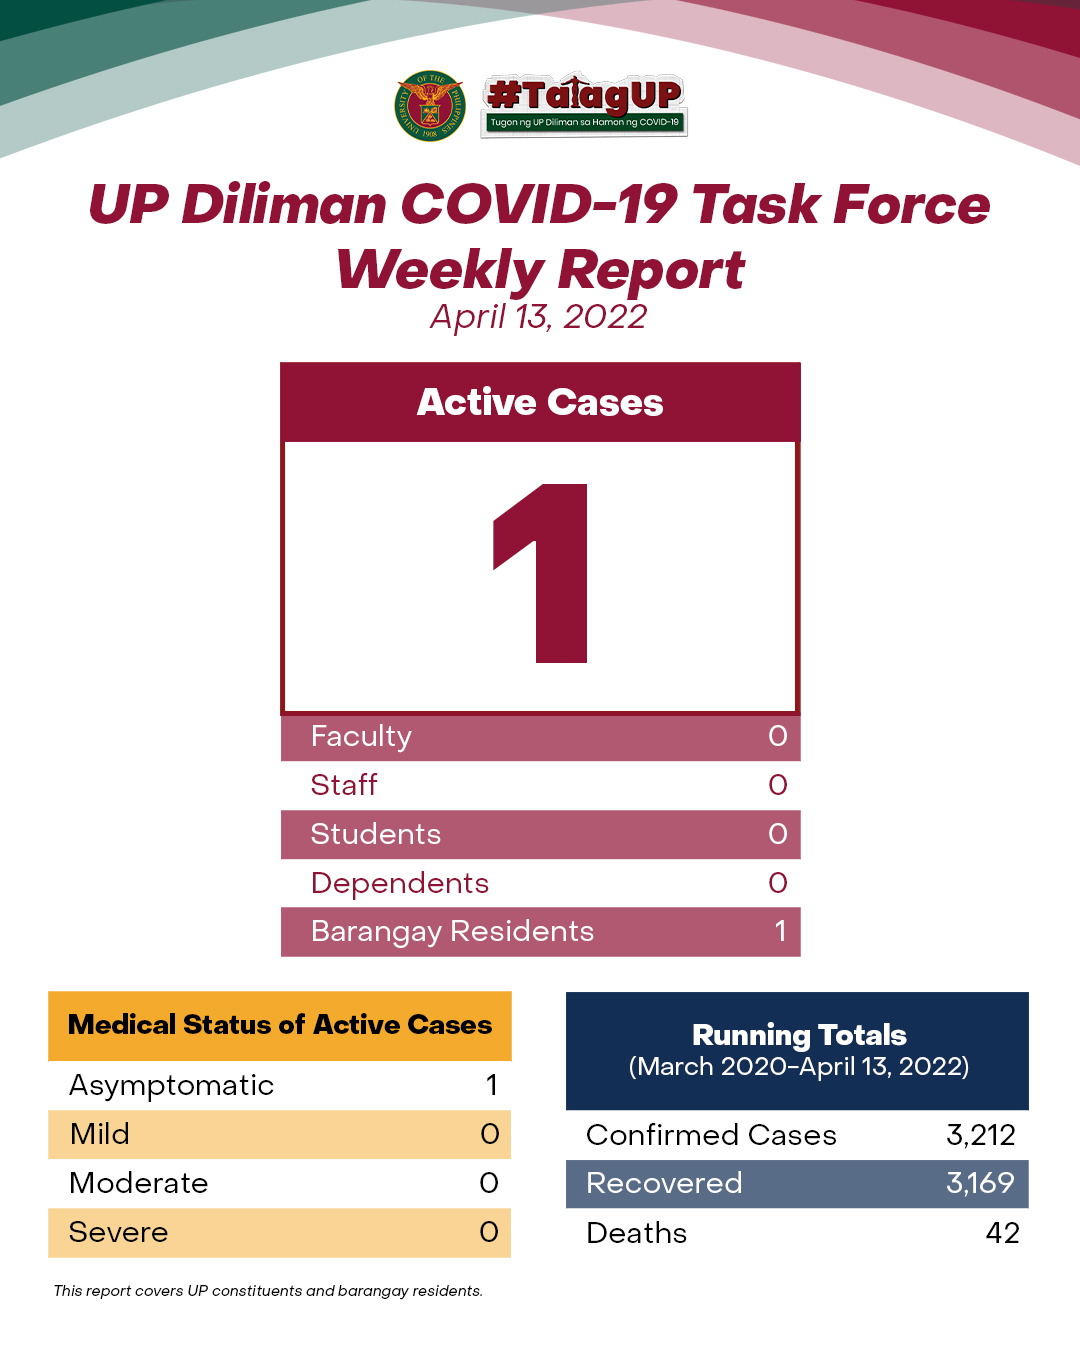 UP Diliman COVID-19 Task Force Weekly Report (April 13, 2022)